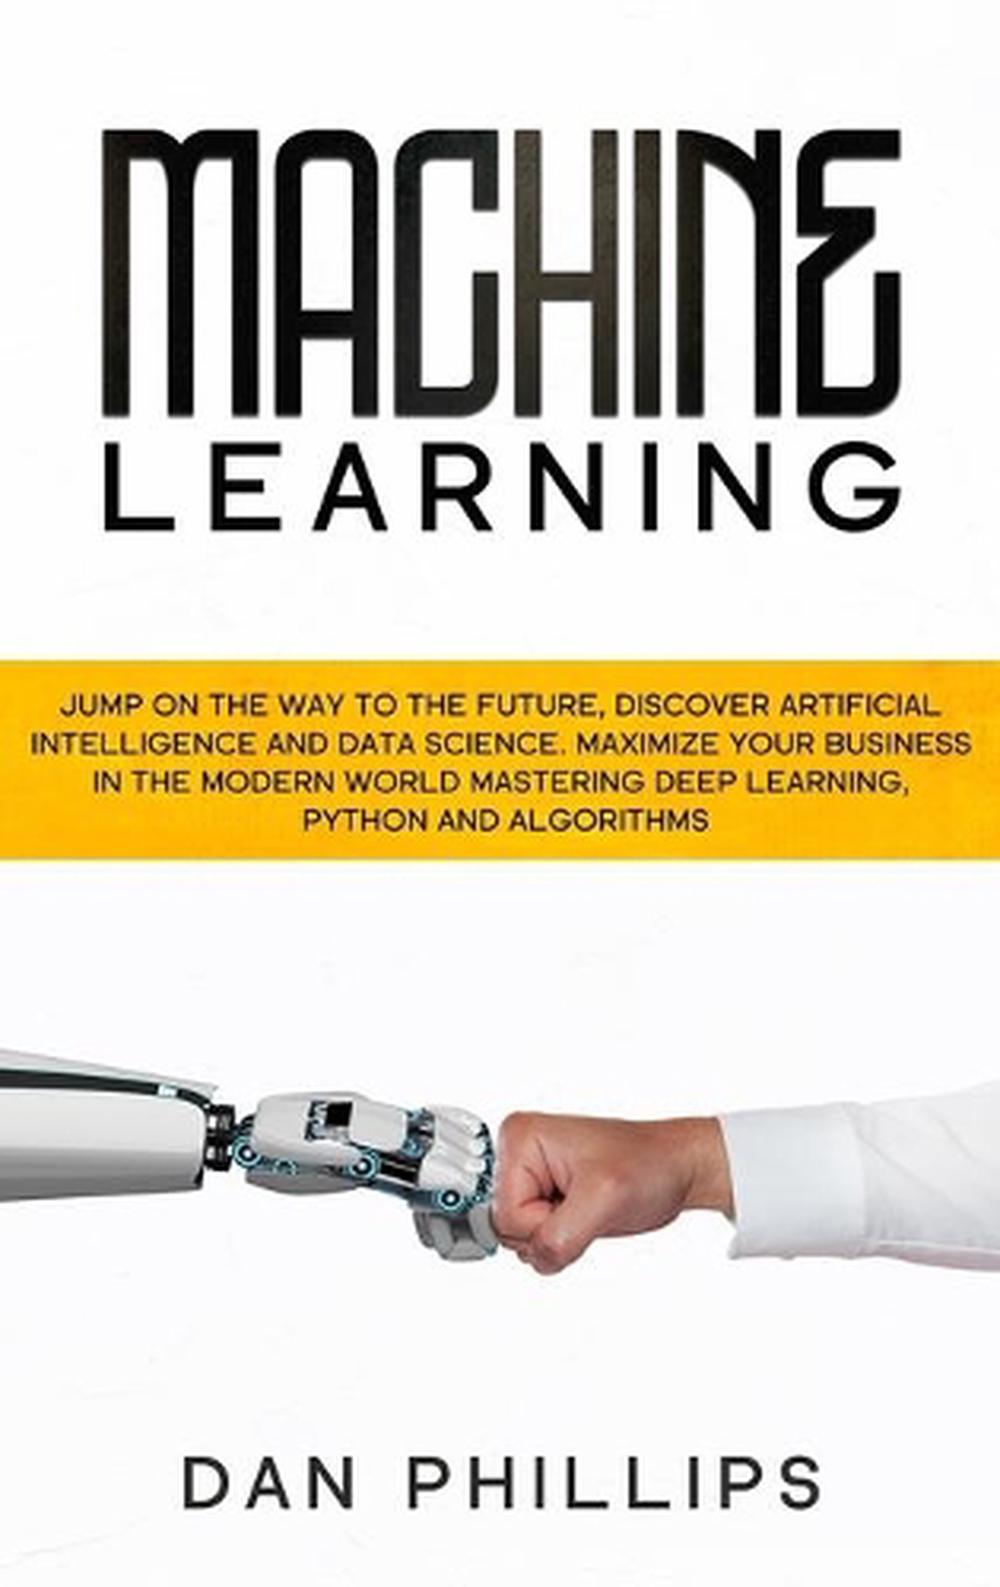 Machine Learning by Dan Phillips (English) Hardcover Book ...